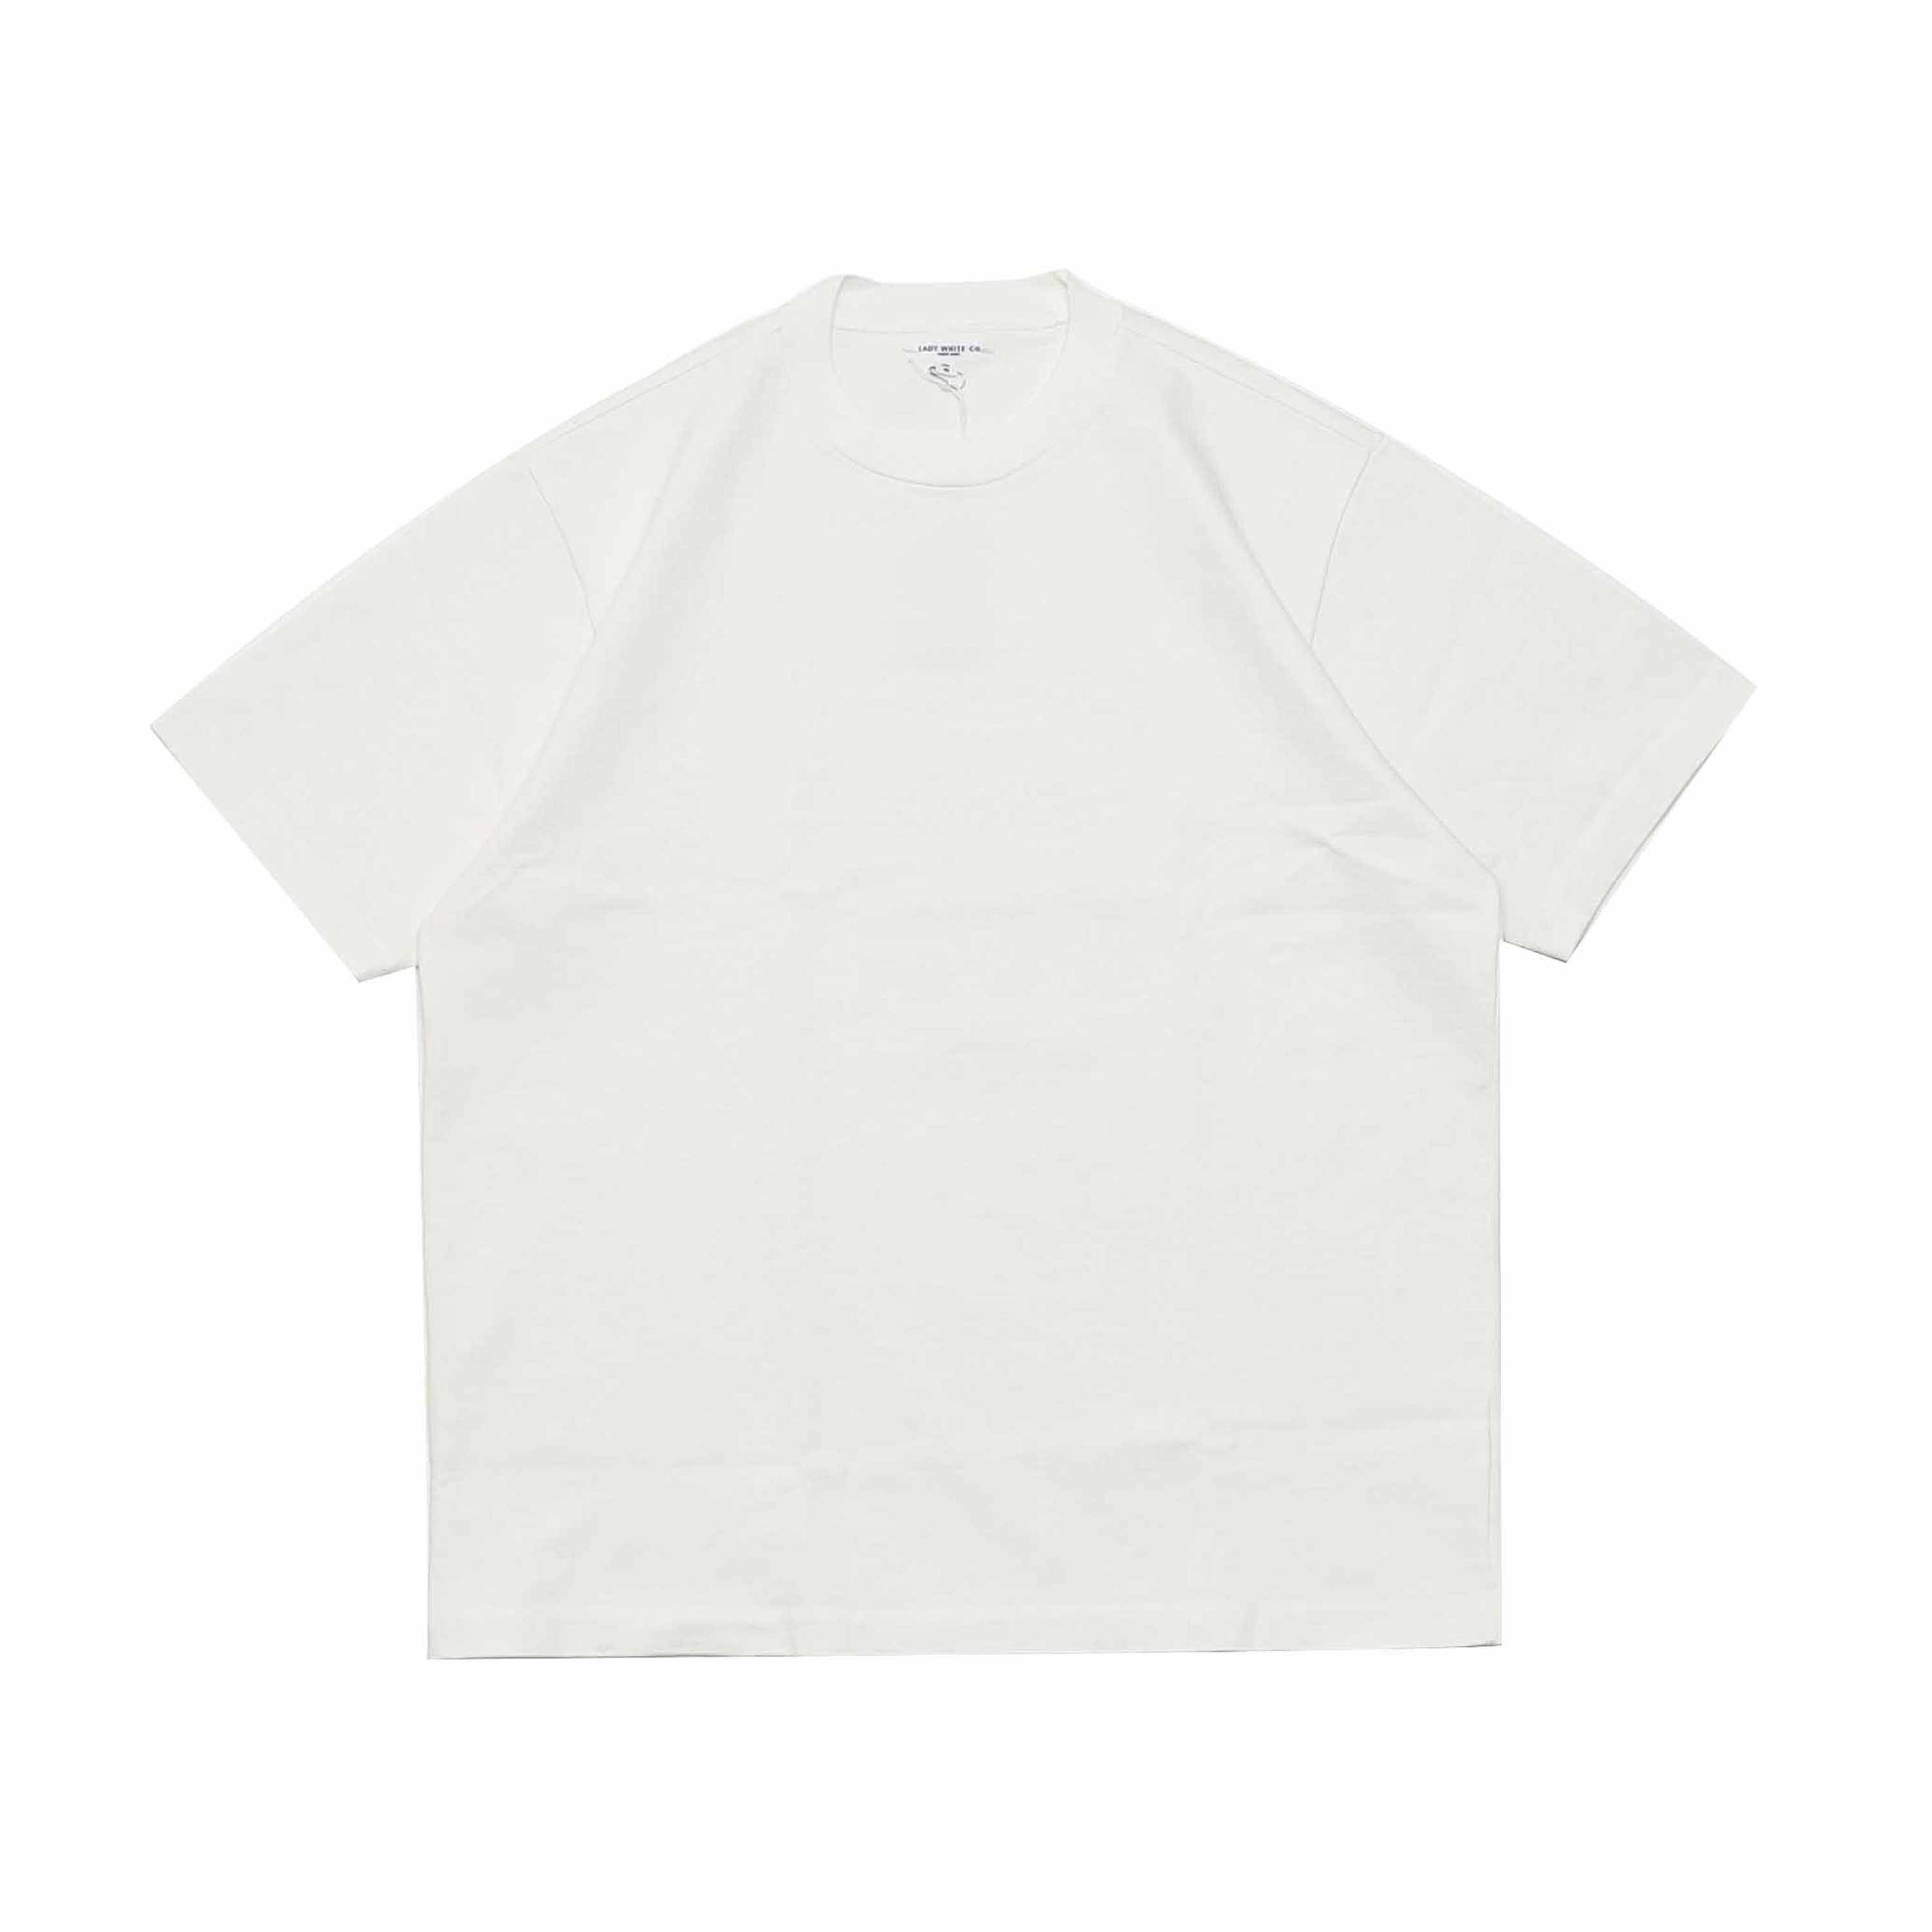 RUGBY S/S T-SHIRT - WHITE